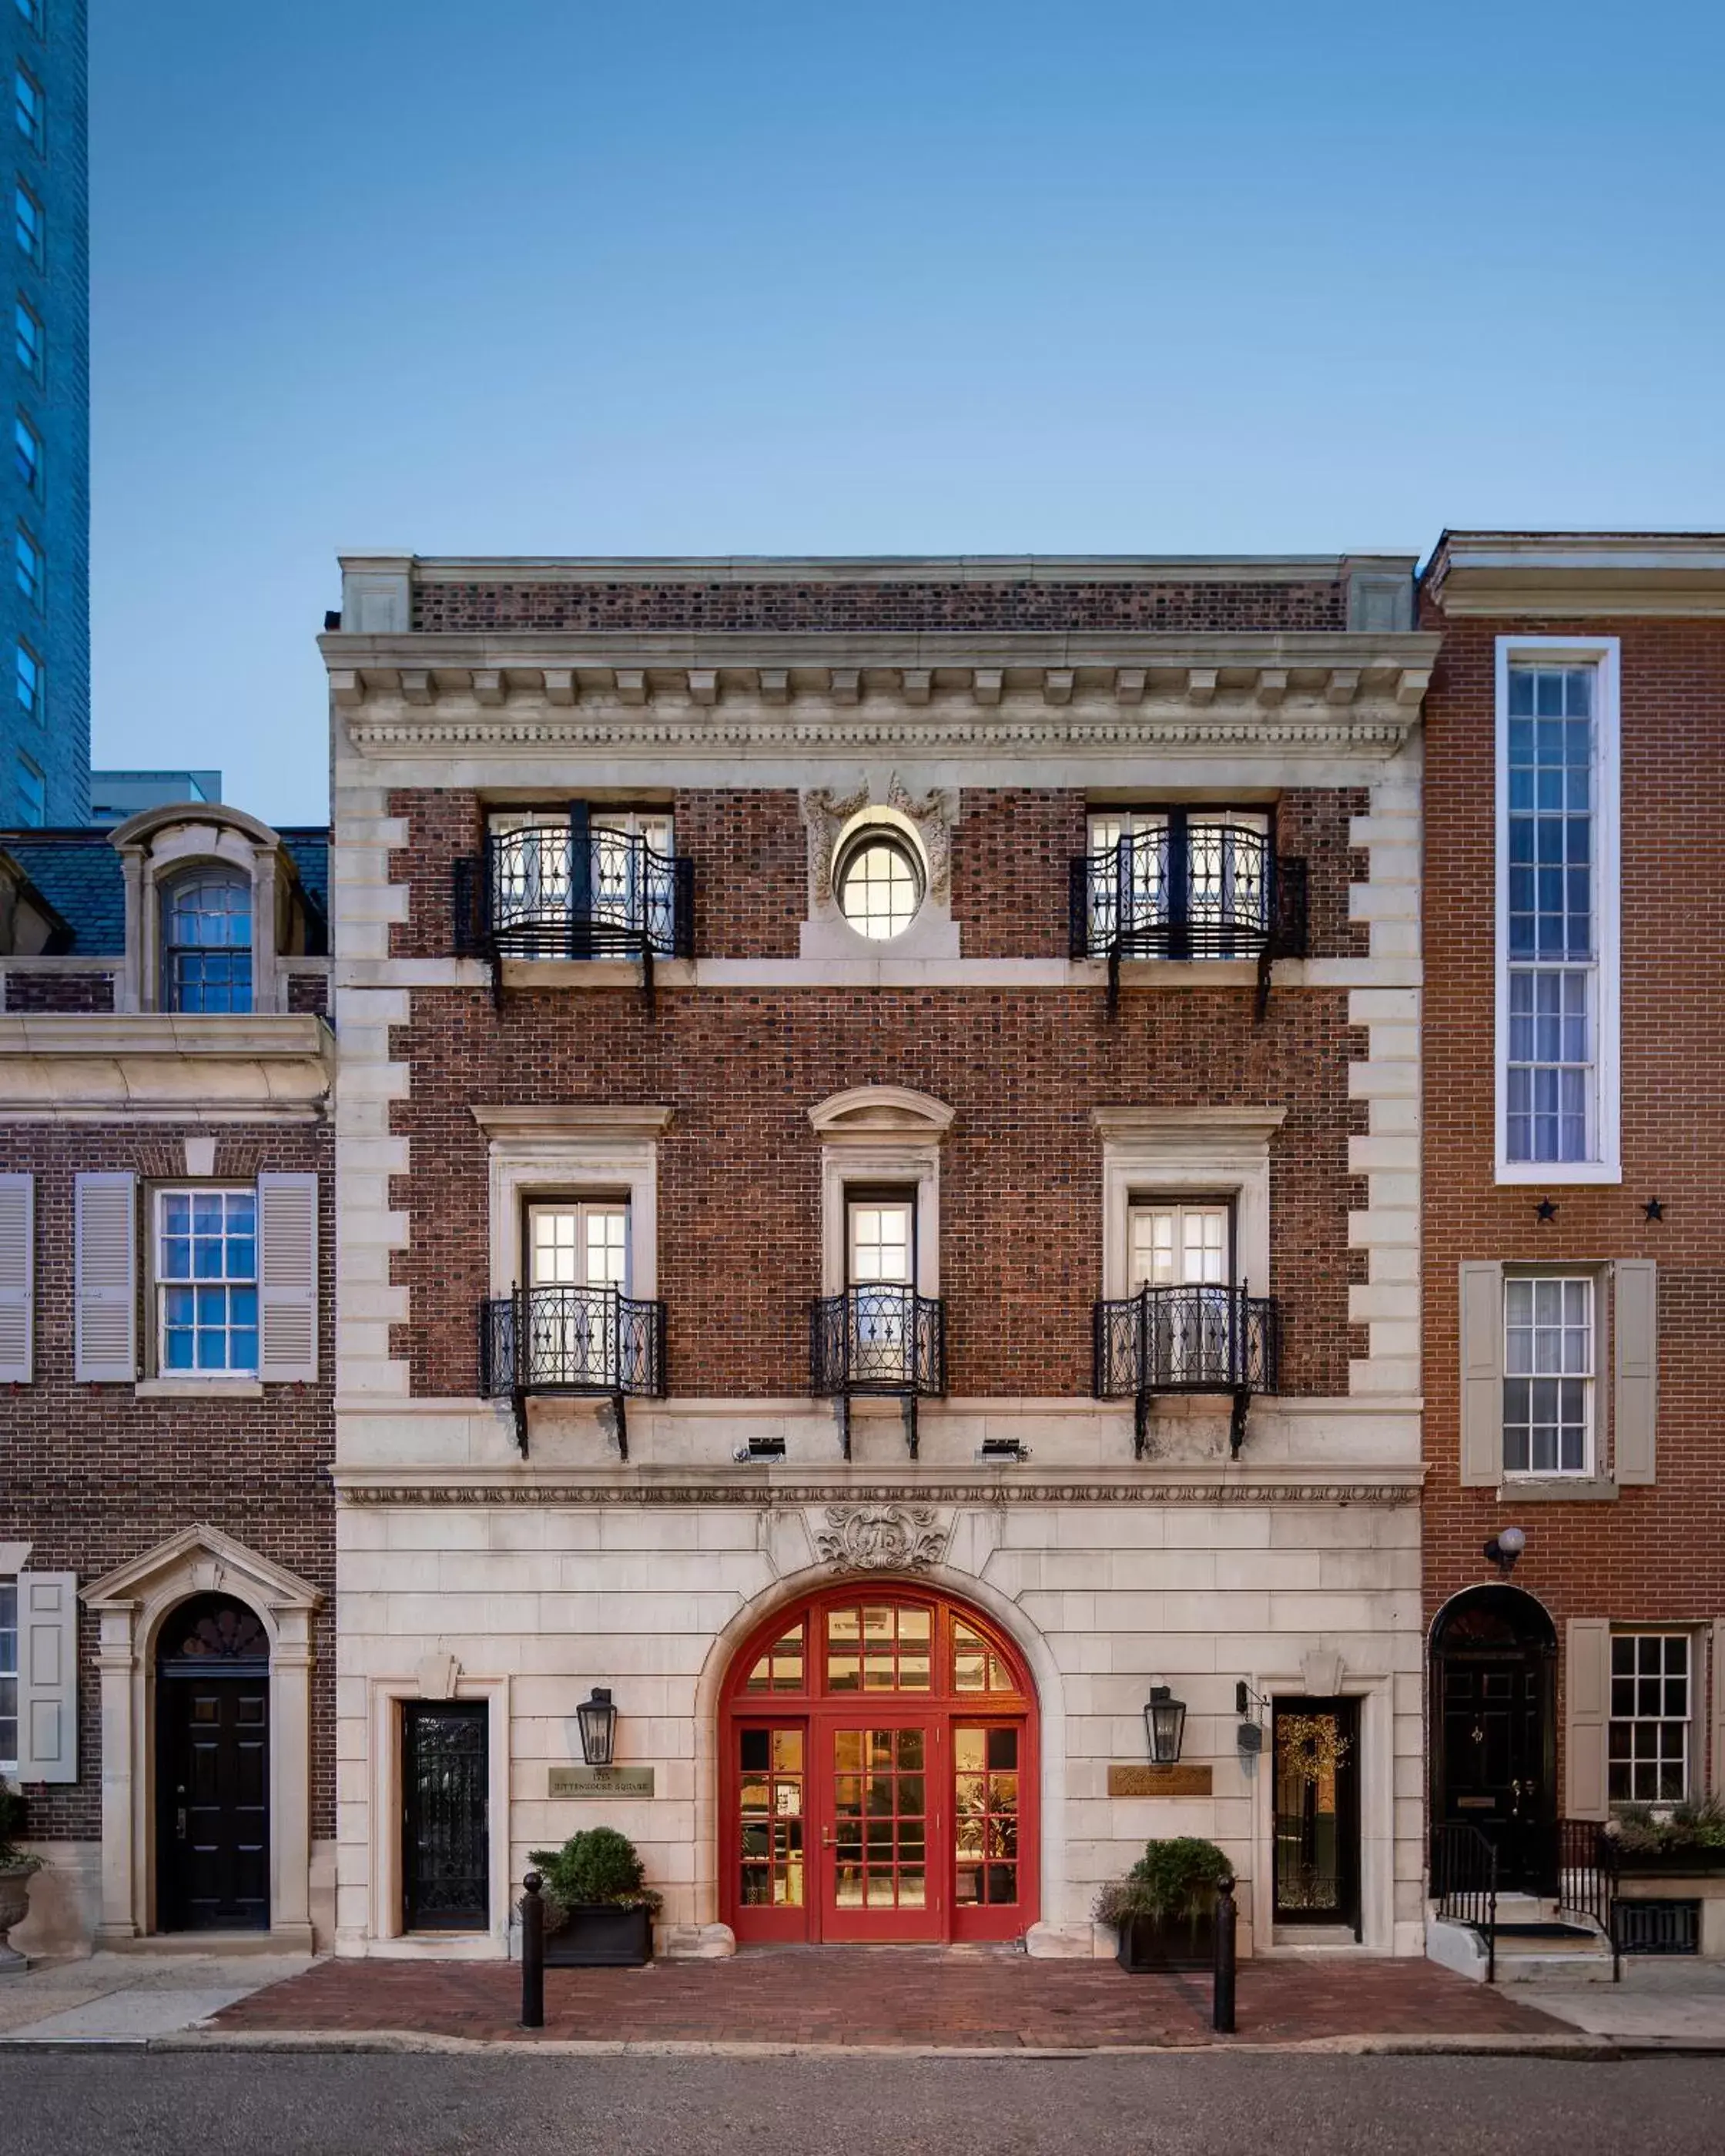 Property Building in The Franklin on Rittenhouse, A Boutique Hotel